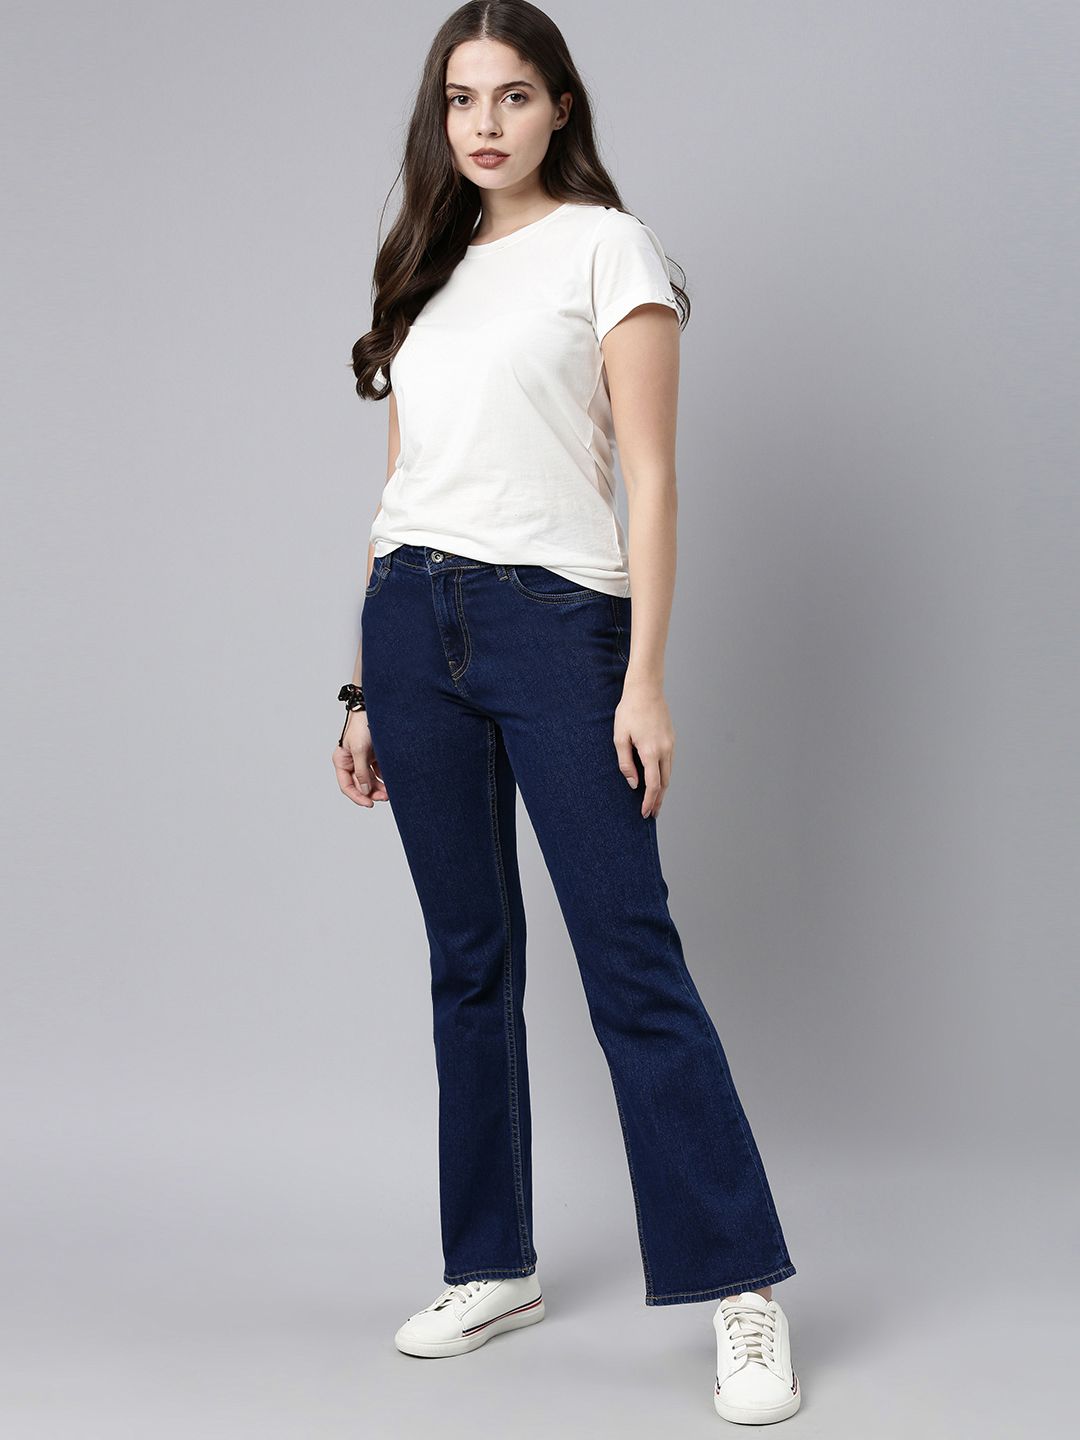 Roadster Women Navy Blue Bootcut Stretchable Jeans Price in India